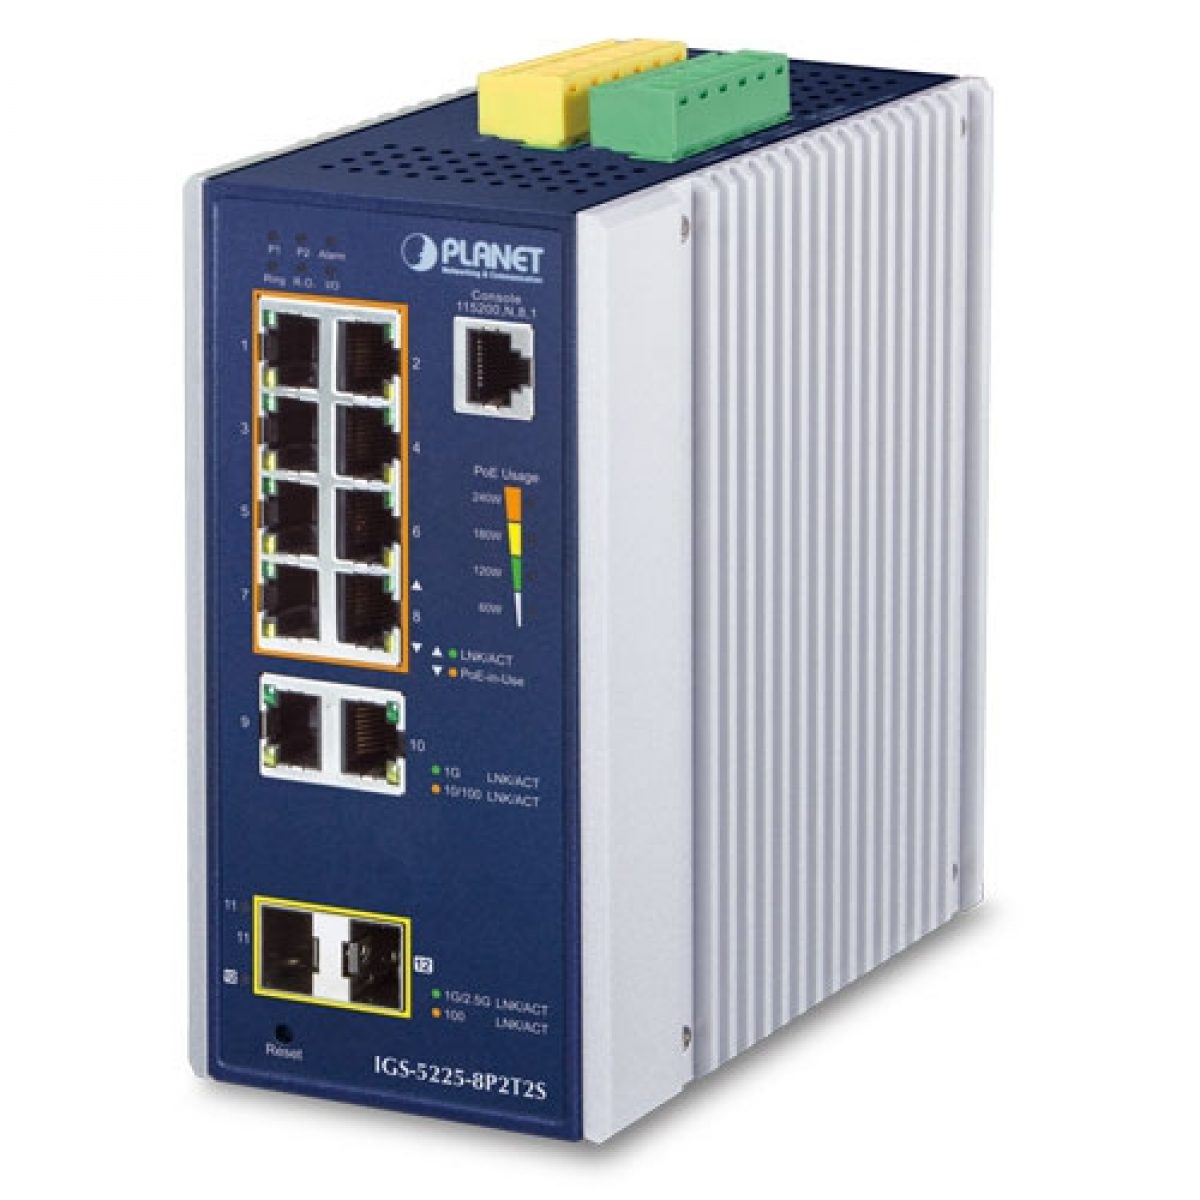 IGS-5225-8P2T2S Industrial L2+ 8-Port 10/100/1000T 802.3at PoE + 2-Port  10/100/100T +2-Port 100/1G/2.5G SFP Managed Ethernet Switch